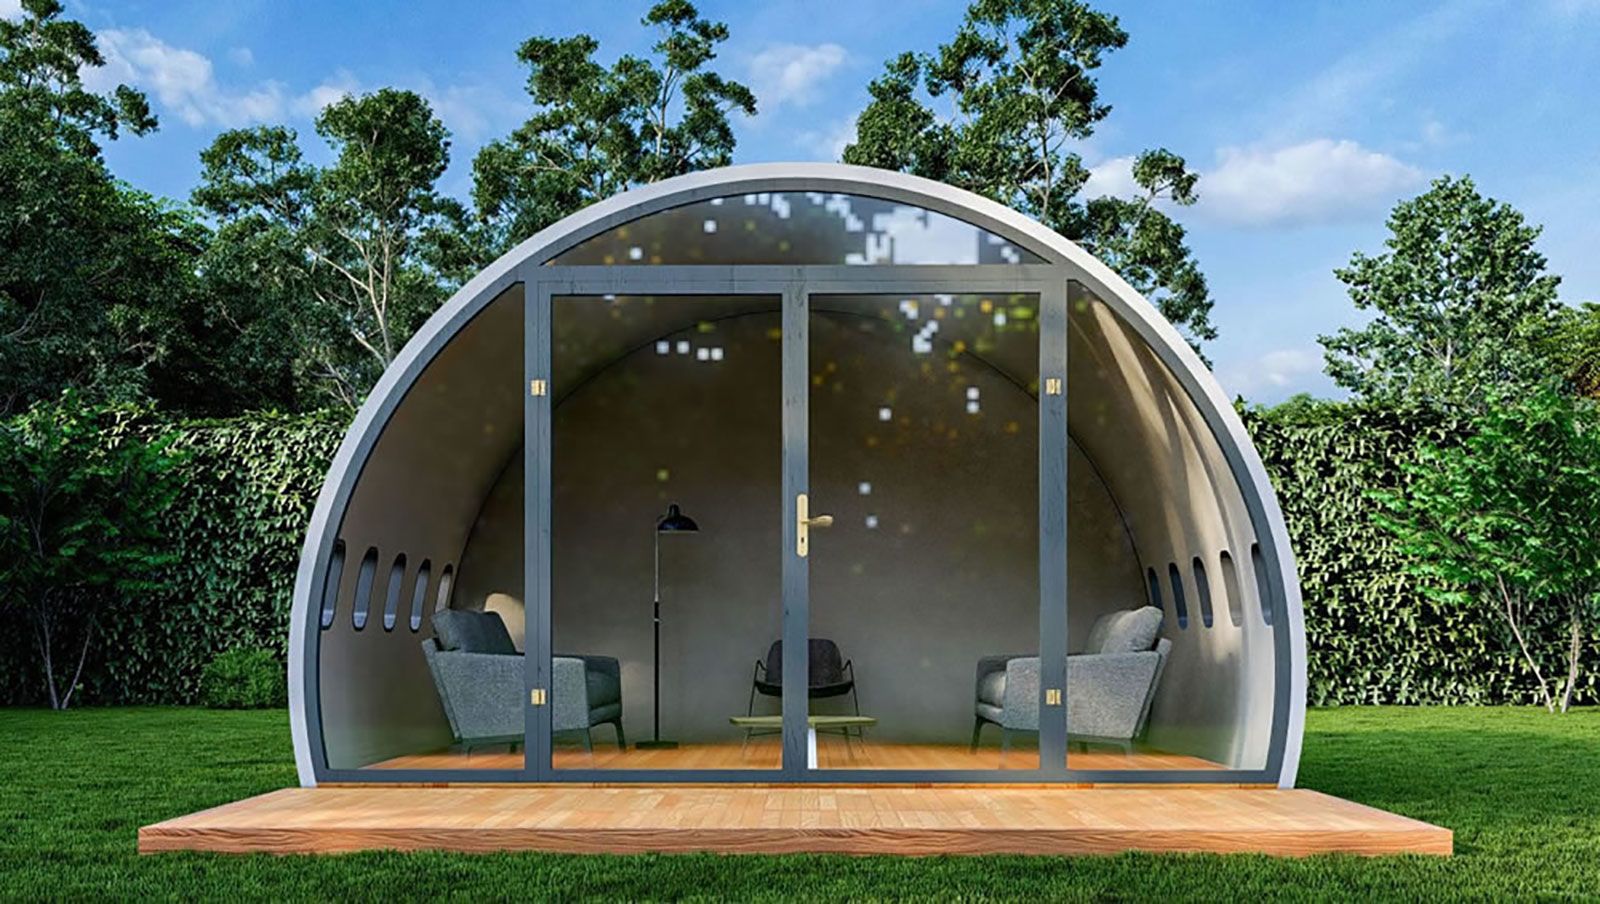 Aeropod: Turning old airplanes into home offices | CNN